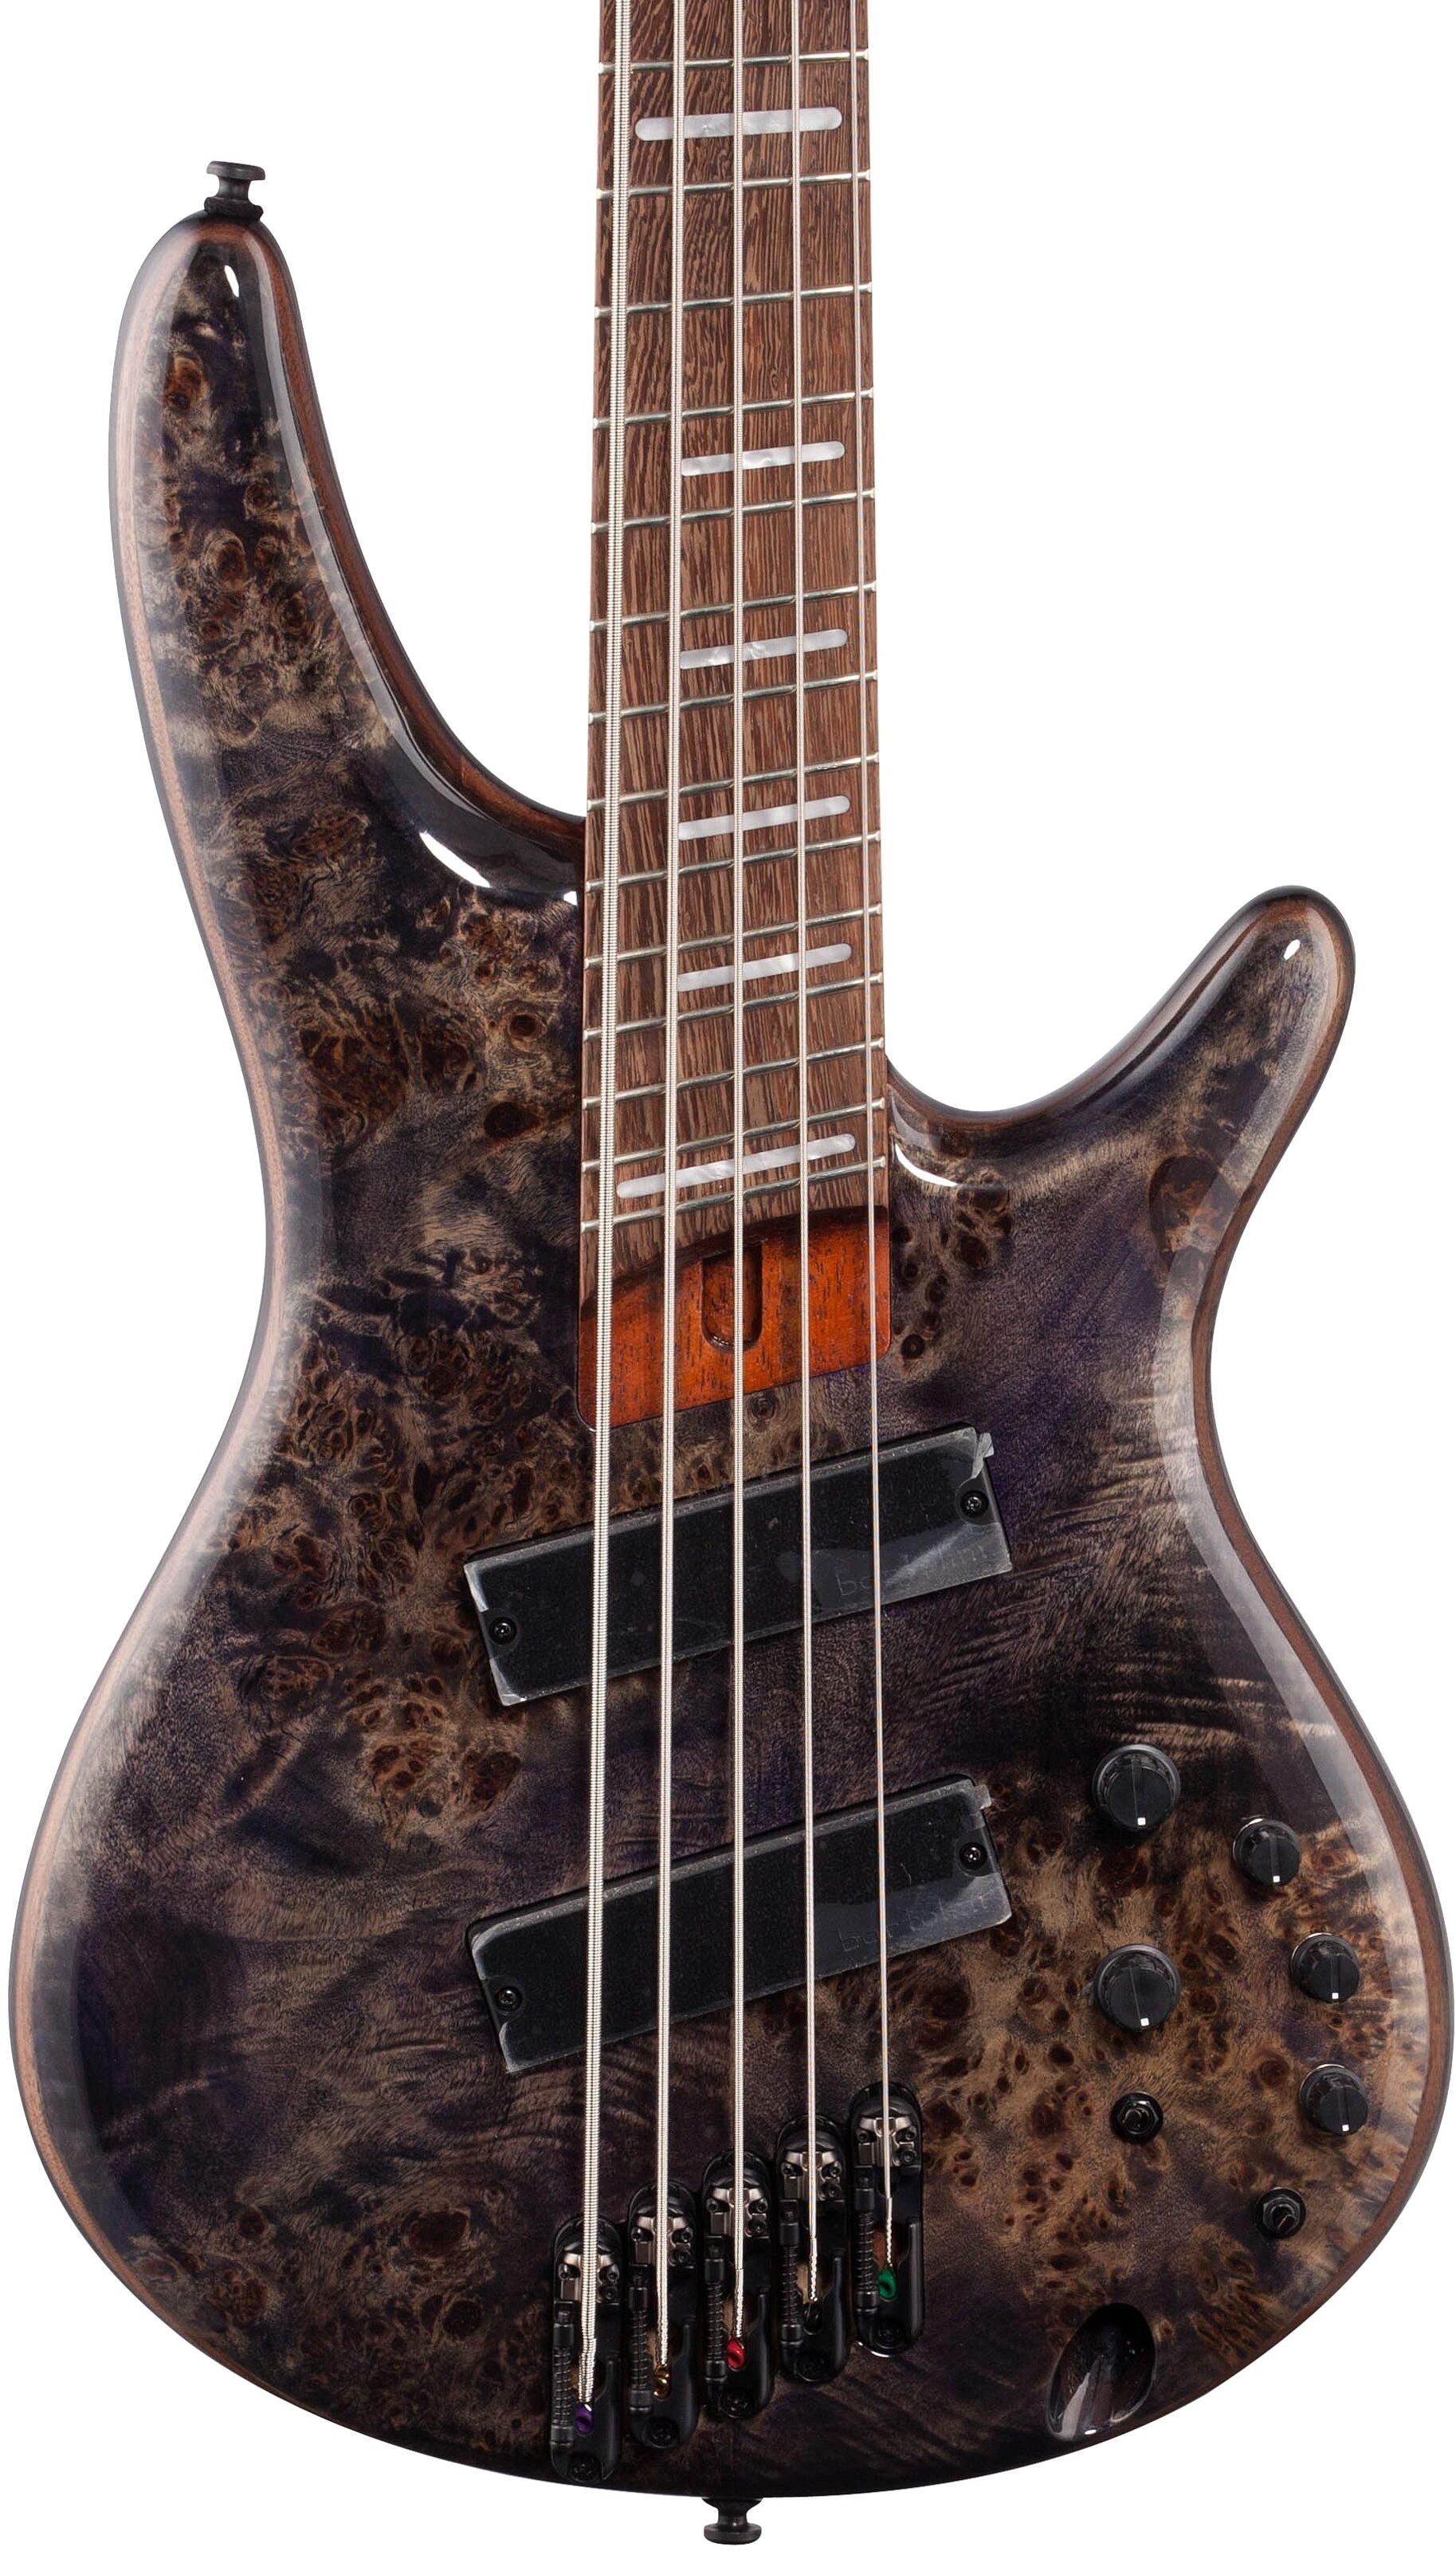 Ibanez SRMS805 Bass Workshop Multi-Scale Electric Bass, 5-String